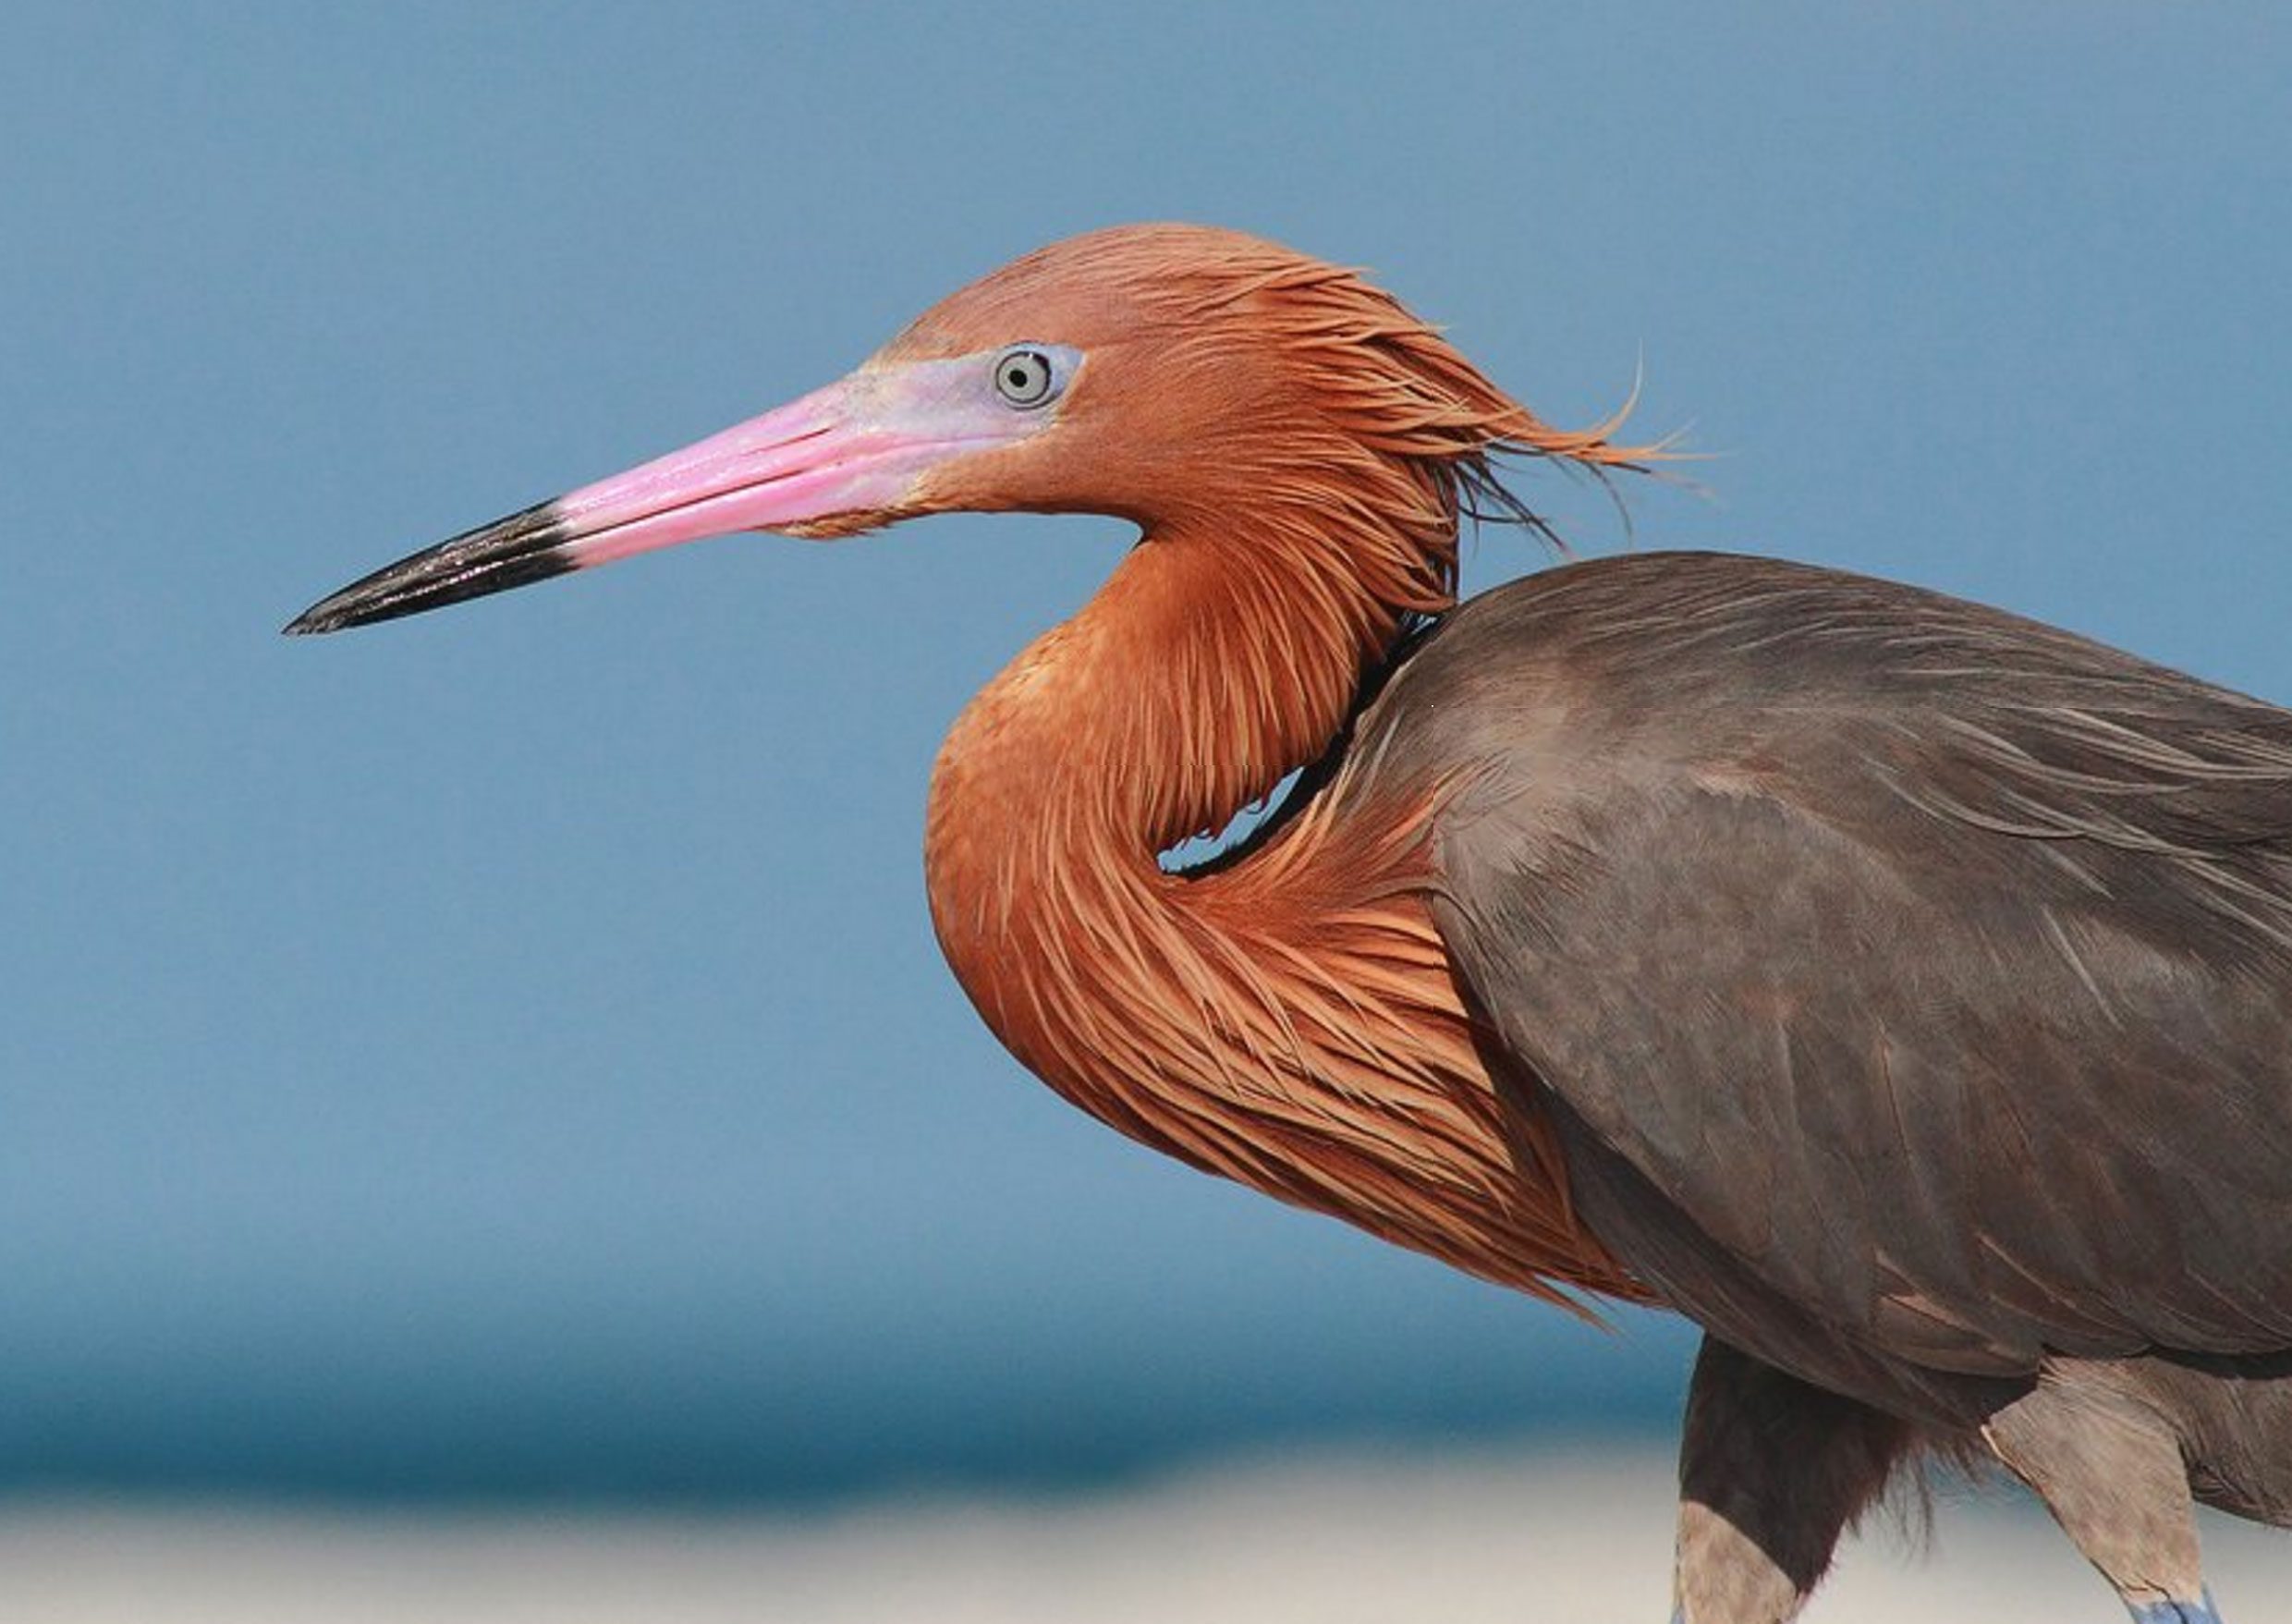 The beautiful Reddish Egret breeds in both the U.S. and Cuba. It is a declining species. Photo by Phillip Simmons via Birdshare.